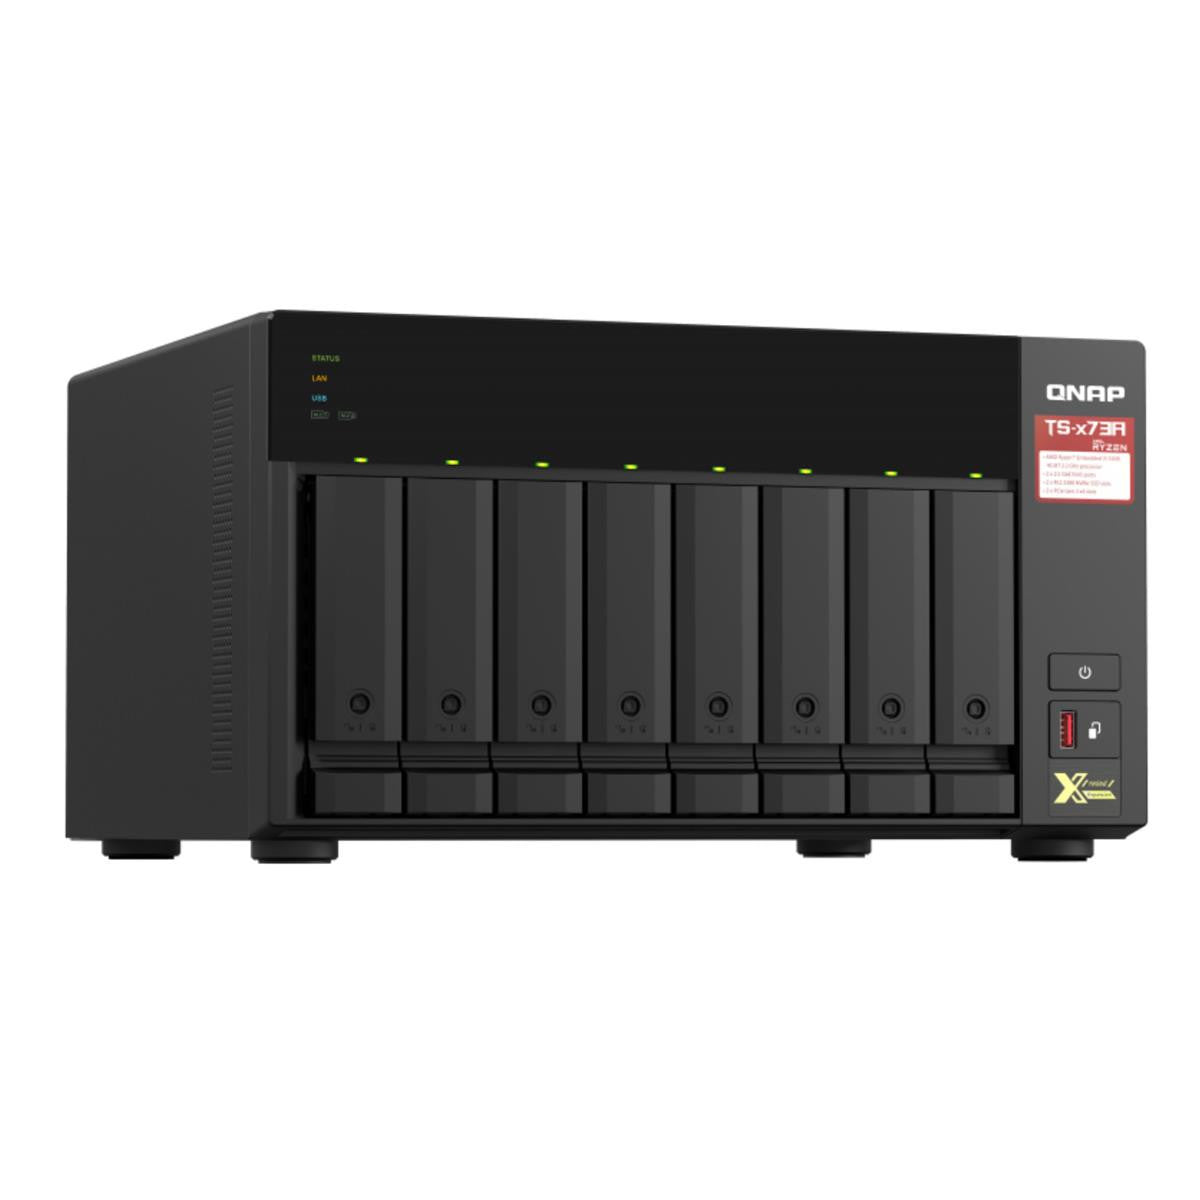 QNAP TS-873A 8-BAY NAS with 64GB DDR4 RAM and 48TB (8x6TB) Western Digital RED PLUS Drives Fully Assembled and Tested